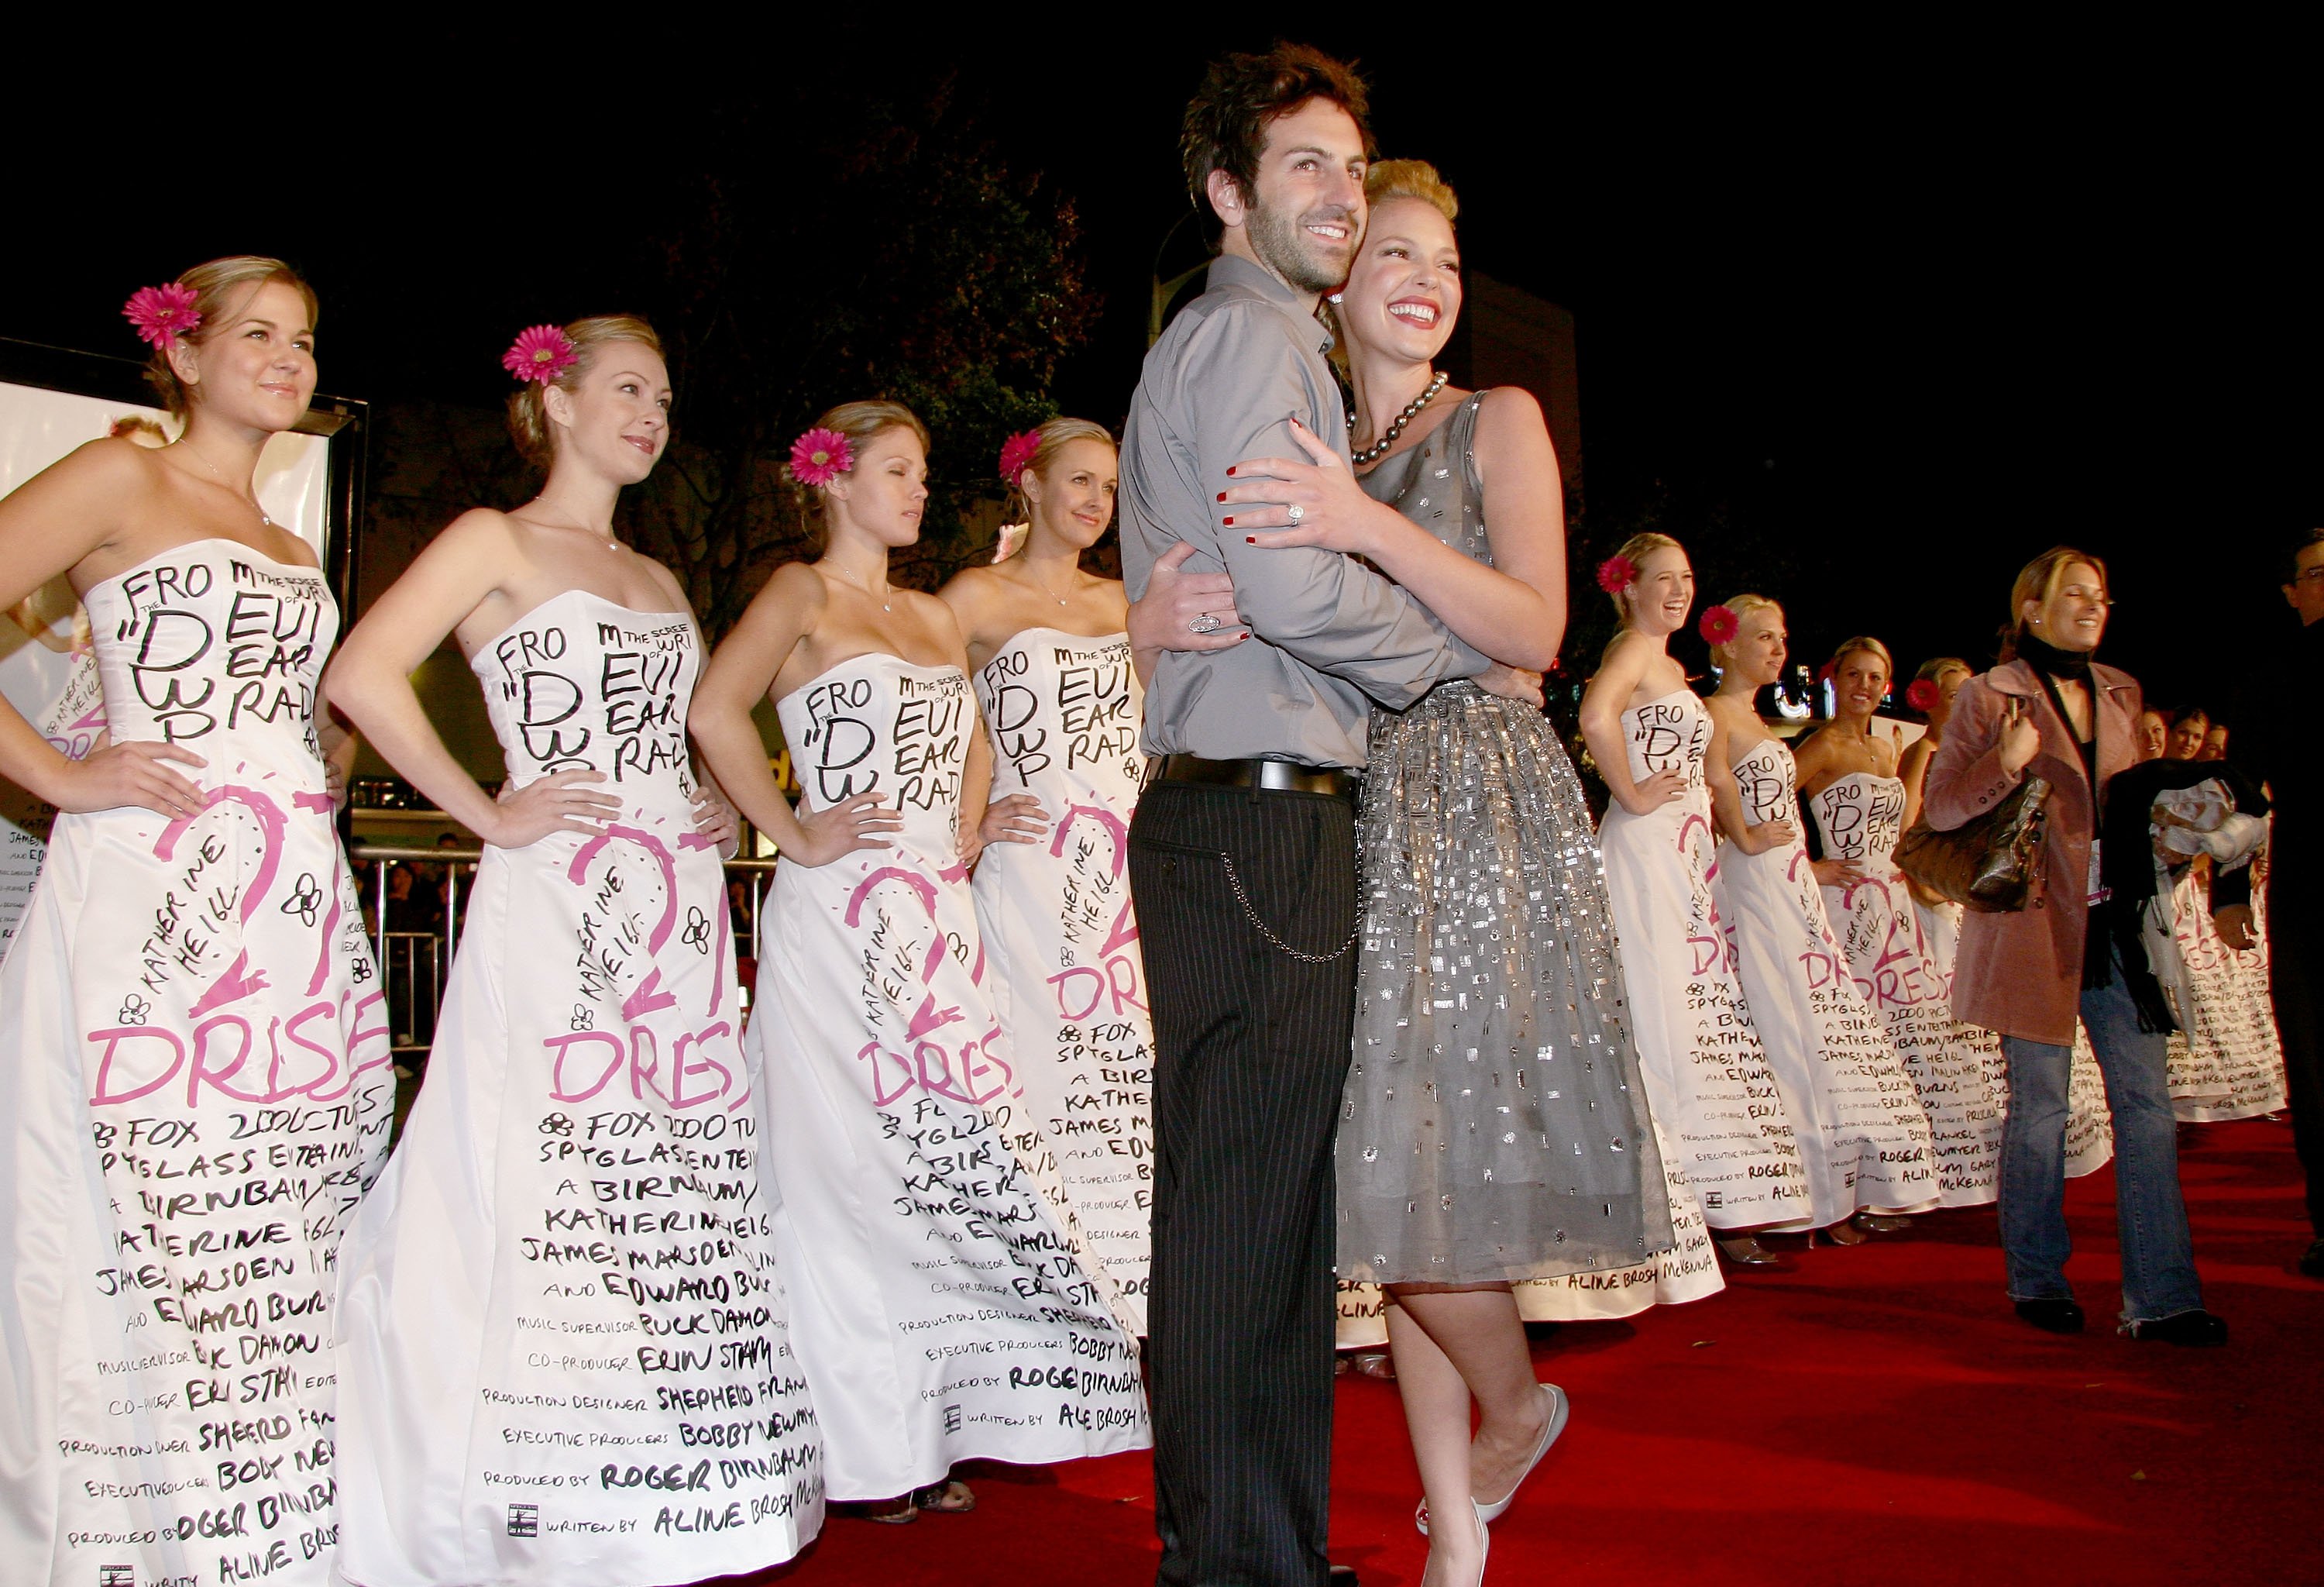 Actress Katherine Heigl (R) and husband Josh Kelley at the premiere of "27 Dresses" held at the Mann Village on January 7, 2008, in Los Angeles, California. | Source: Getty Images